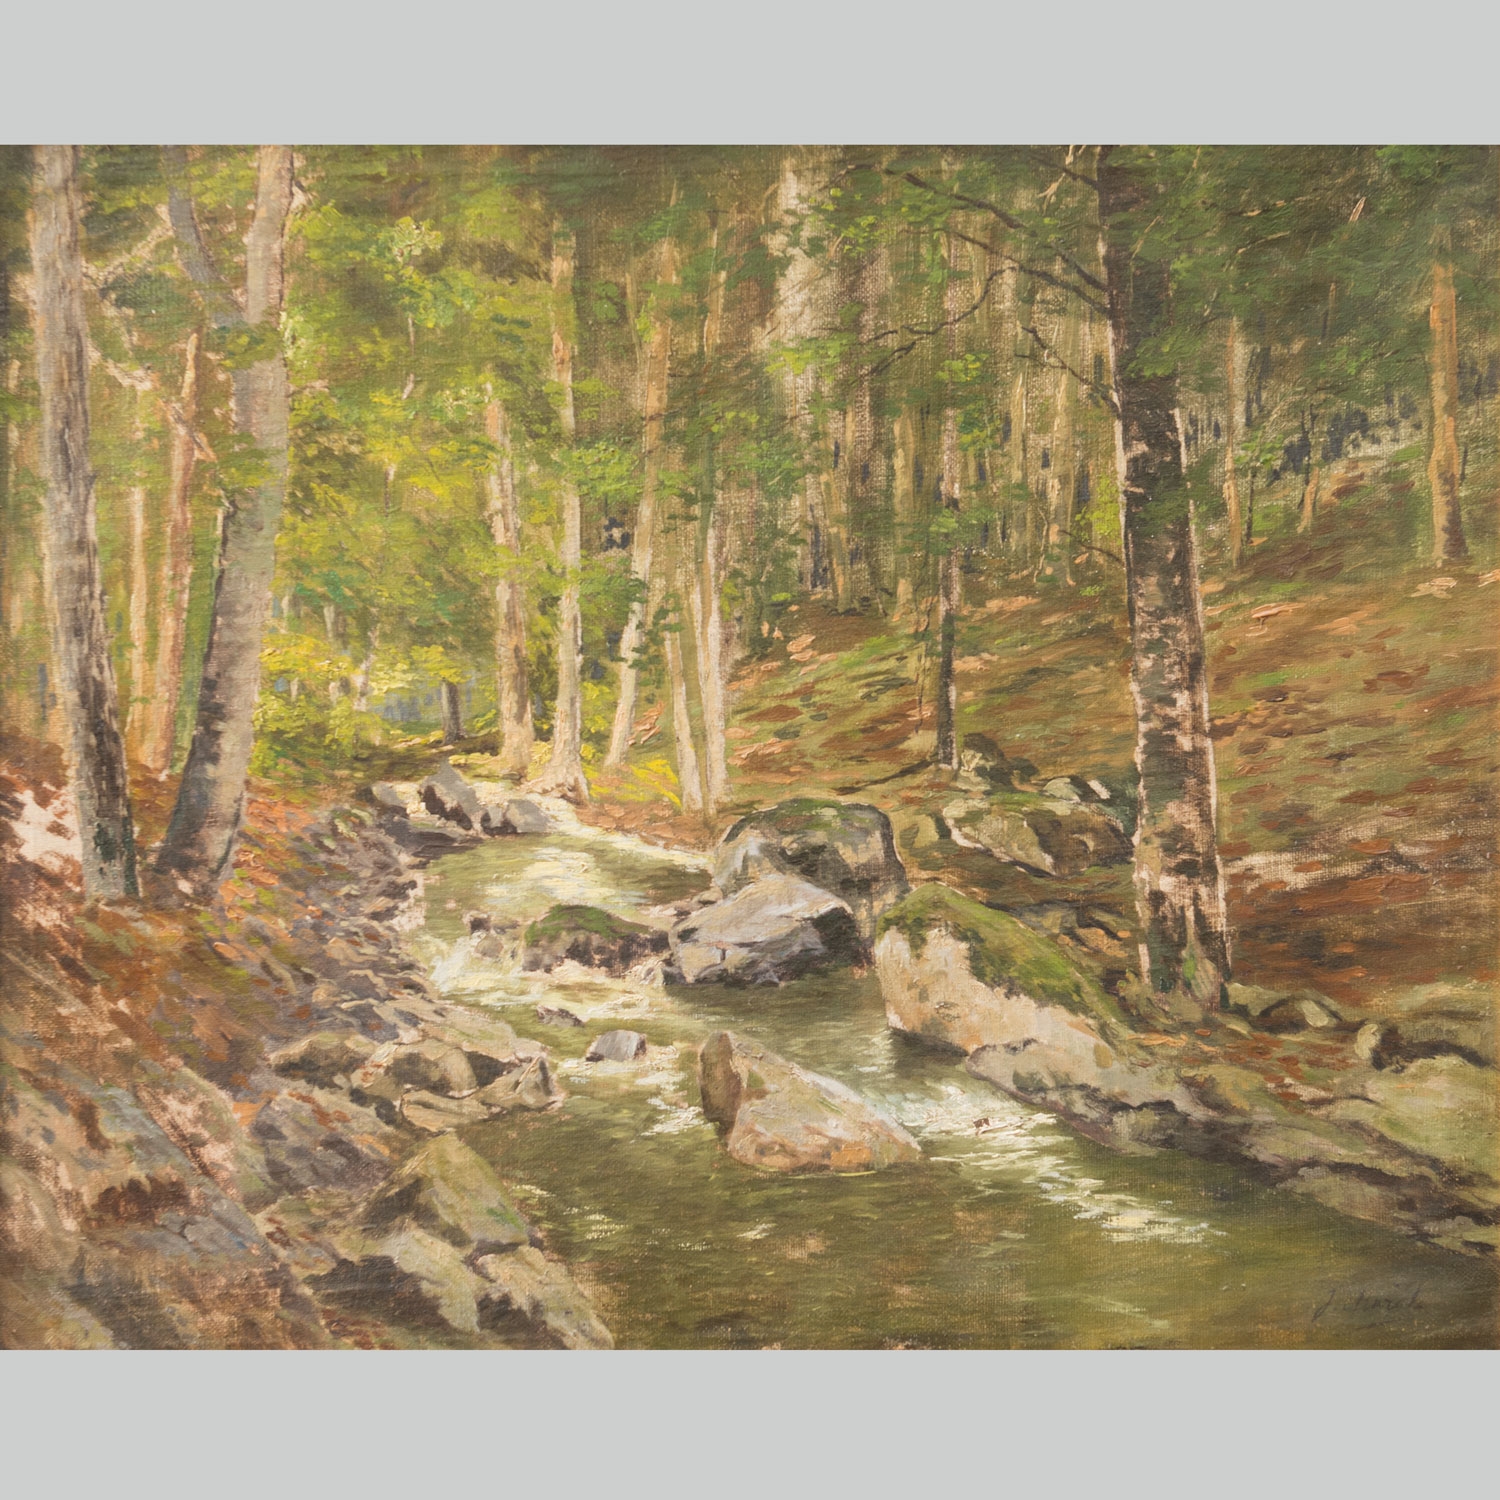 Artwork by Julius Eduard Marak, River in the forest, Made of oil on canvas